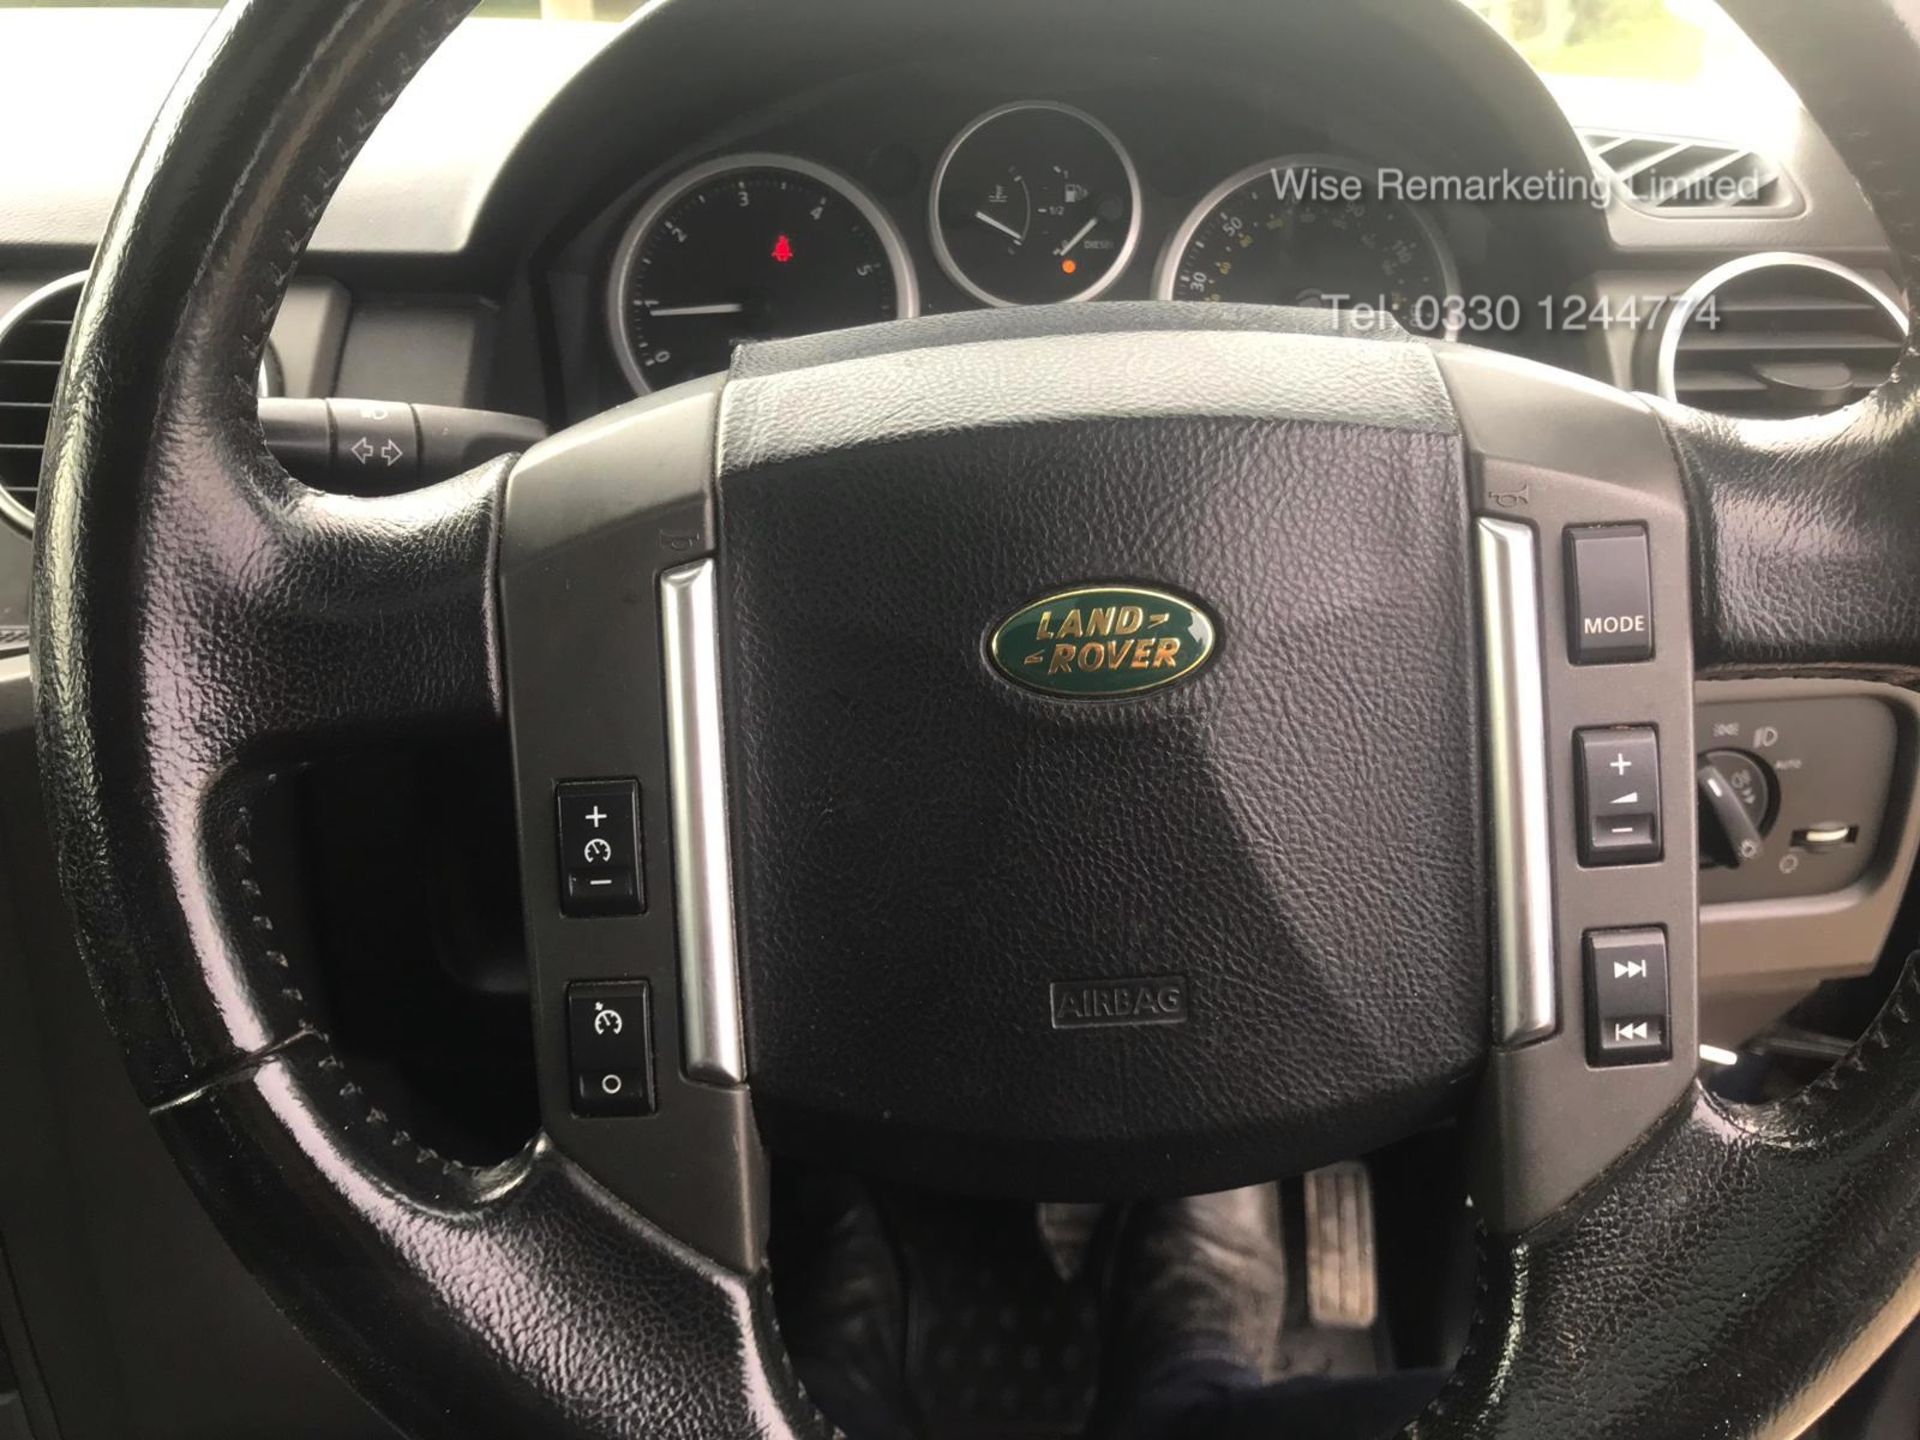 Land Rover Discovery 2.7 TdV6 Special Equipment - Automatic (2007 Model) Full Leather - Elec Sunroof - Image 17 of 20